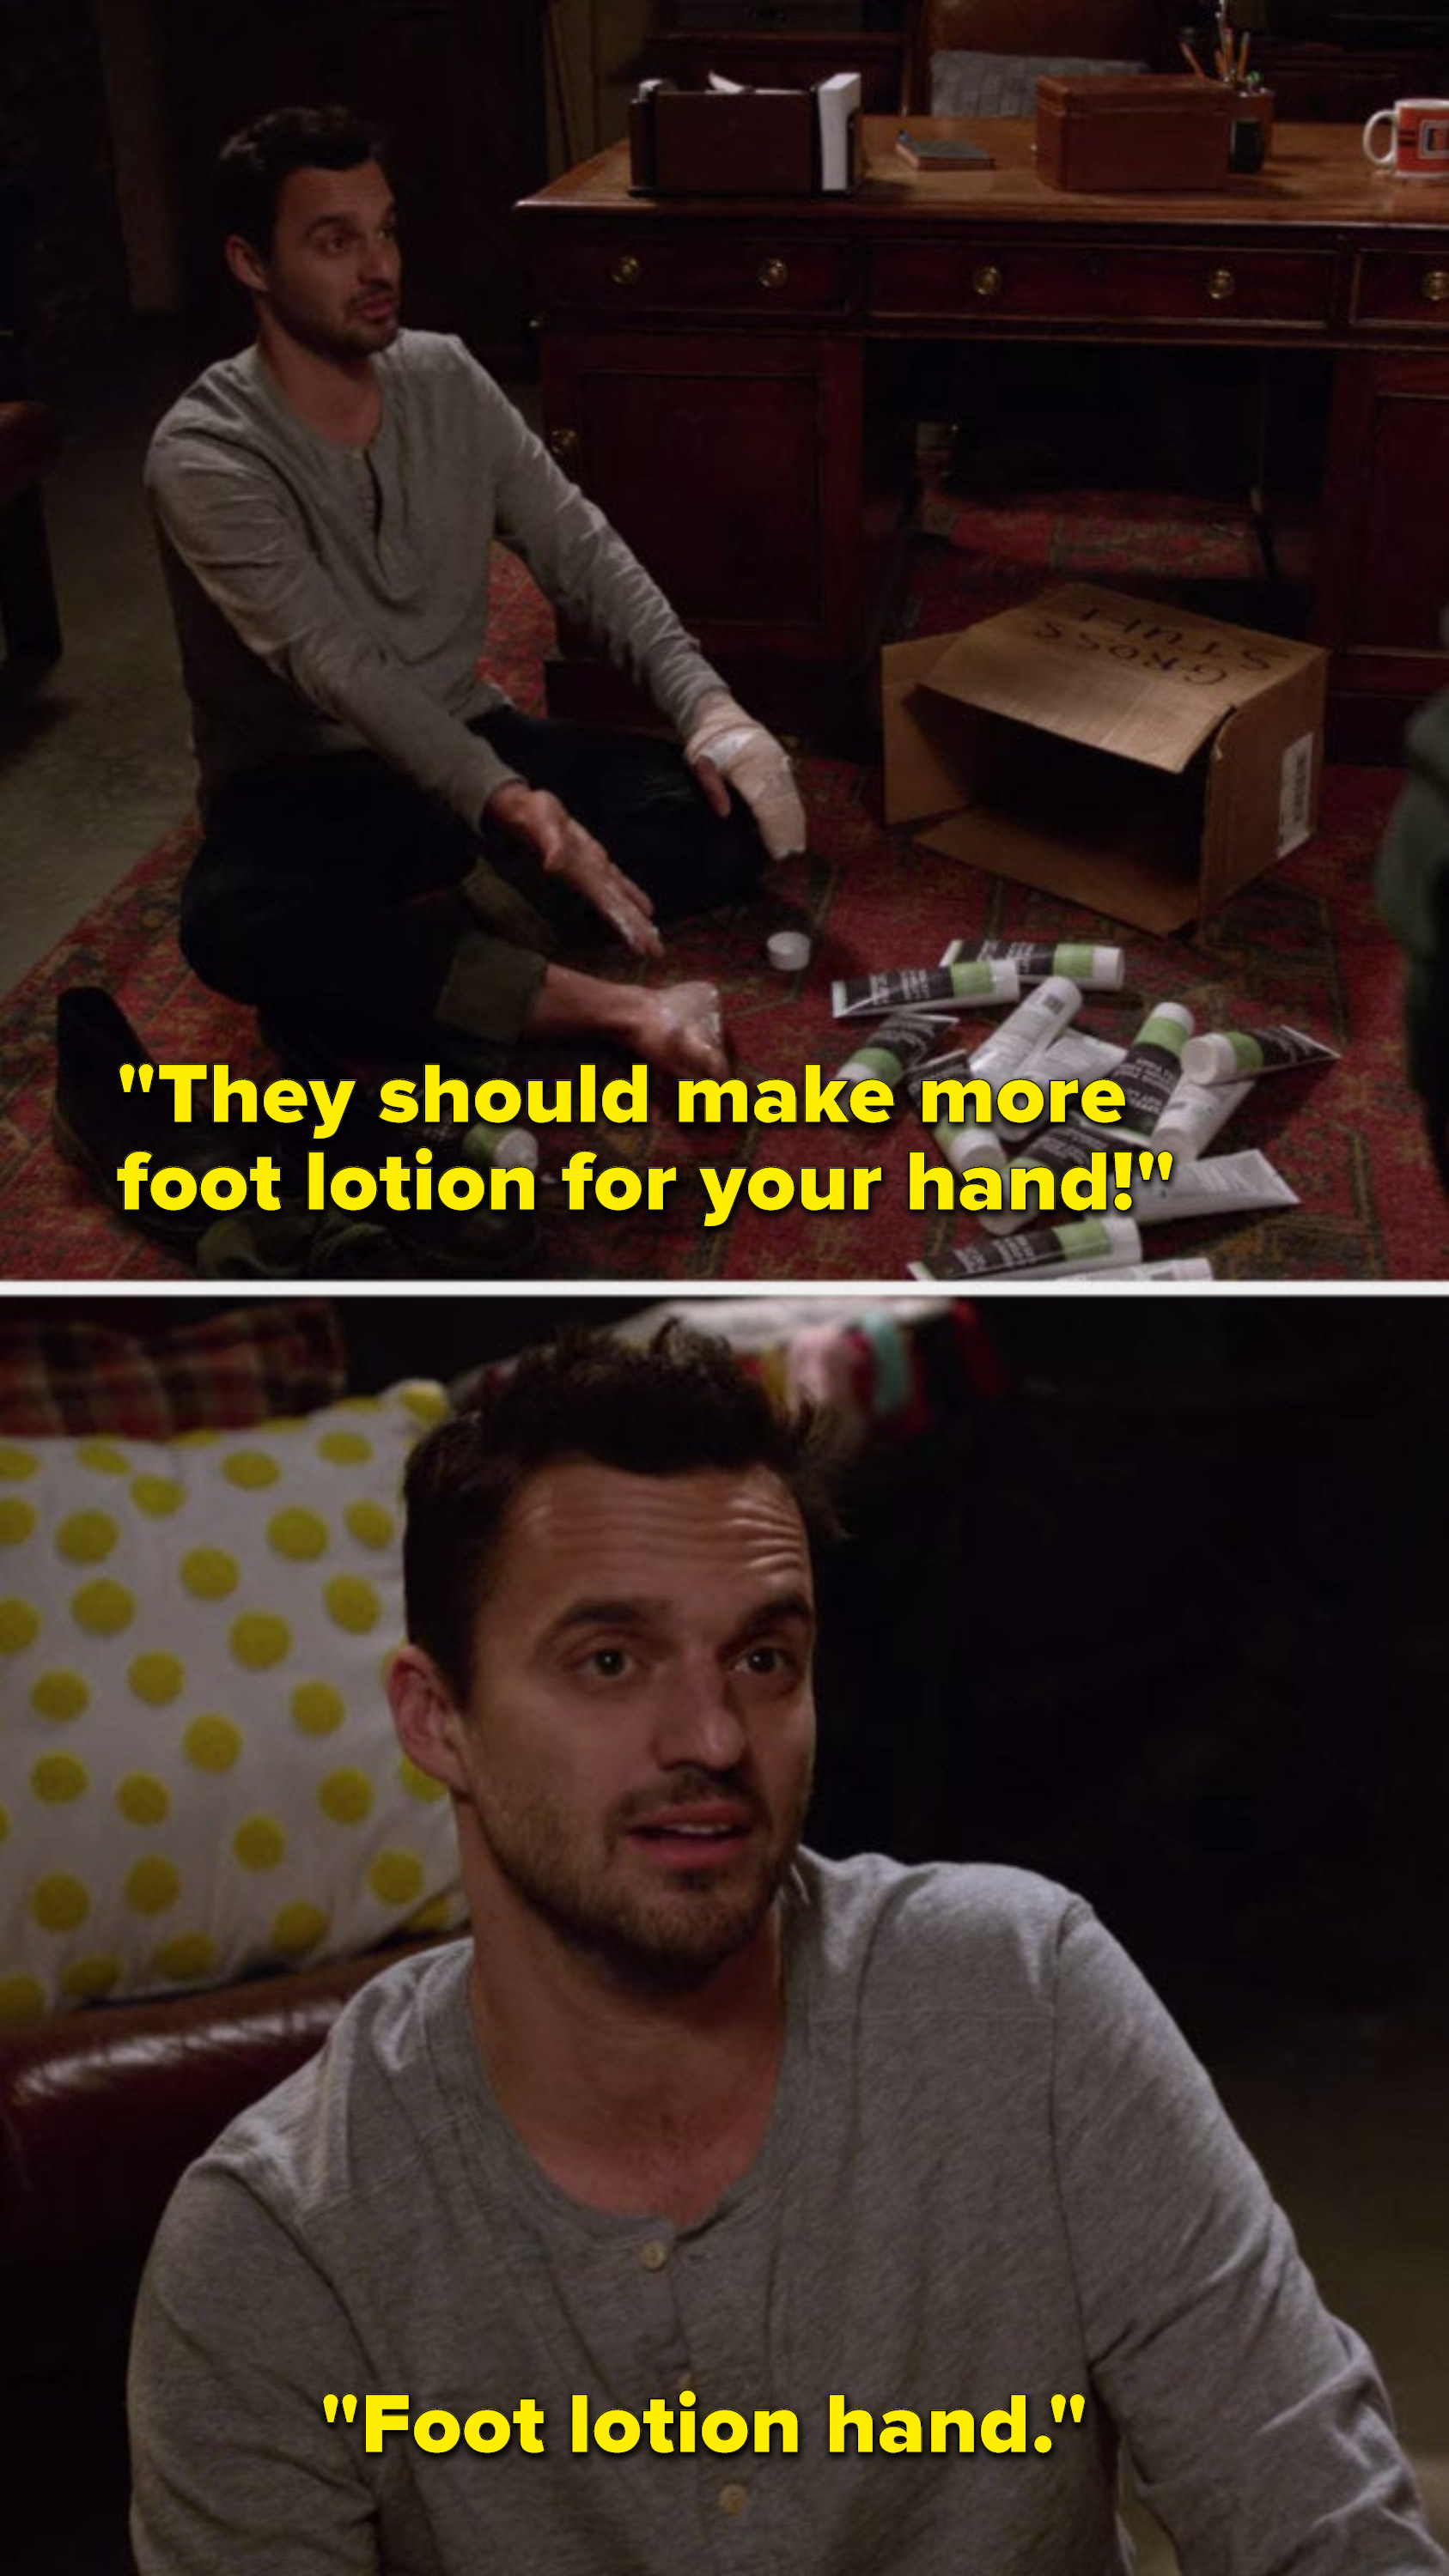 Nick says, &quot;&quot;They should make more foot lotion for your hand, foot lotion hand&quot;